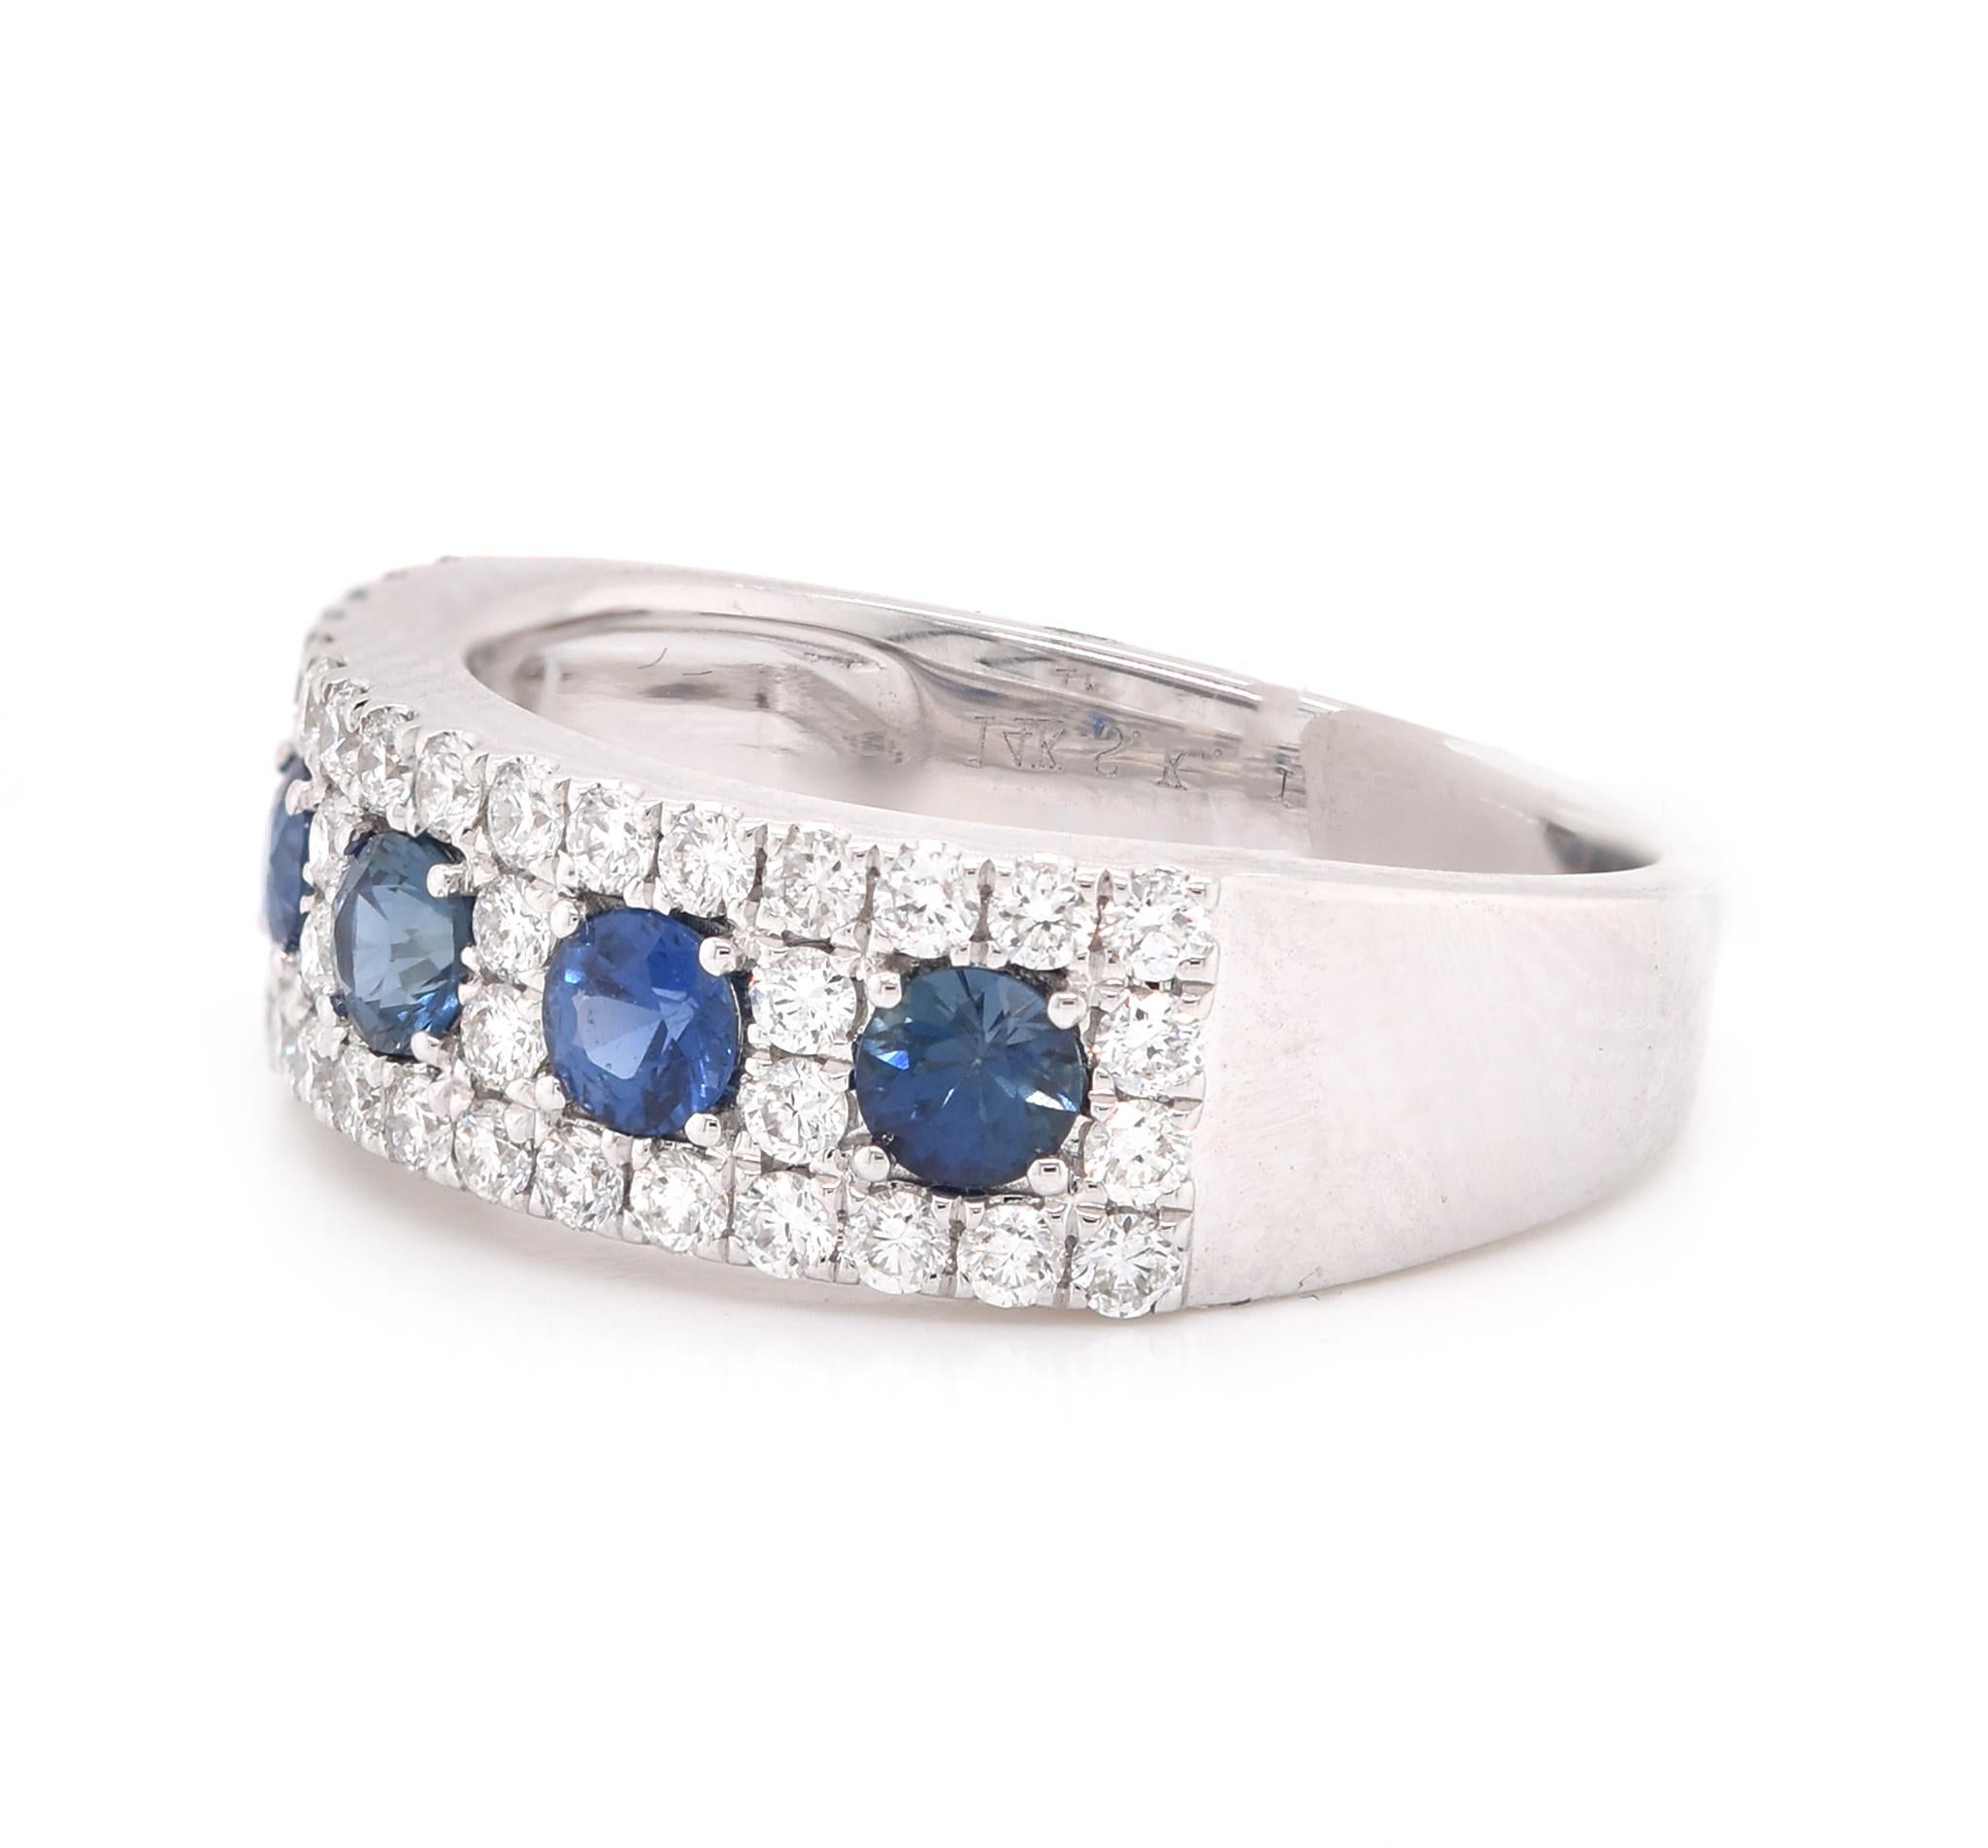 Designer: custom design
Material: 14K white gold
Diamond: 44 round cut = .64cttw
Color: G
Clarity: VS2
Sapphire: 5 round cut = .74cttw
Dimensions: ring top measures 6.4mm wide
Ring Size: 6.5 (please allow two extra shipping days for sizing requests)